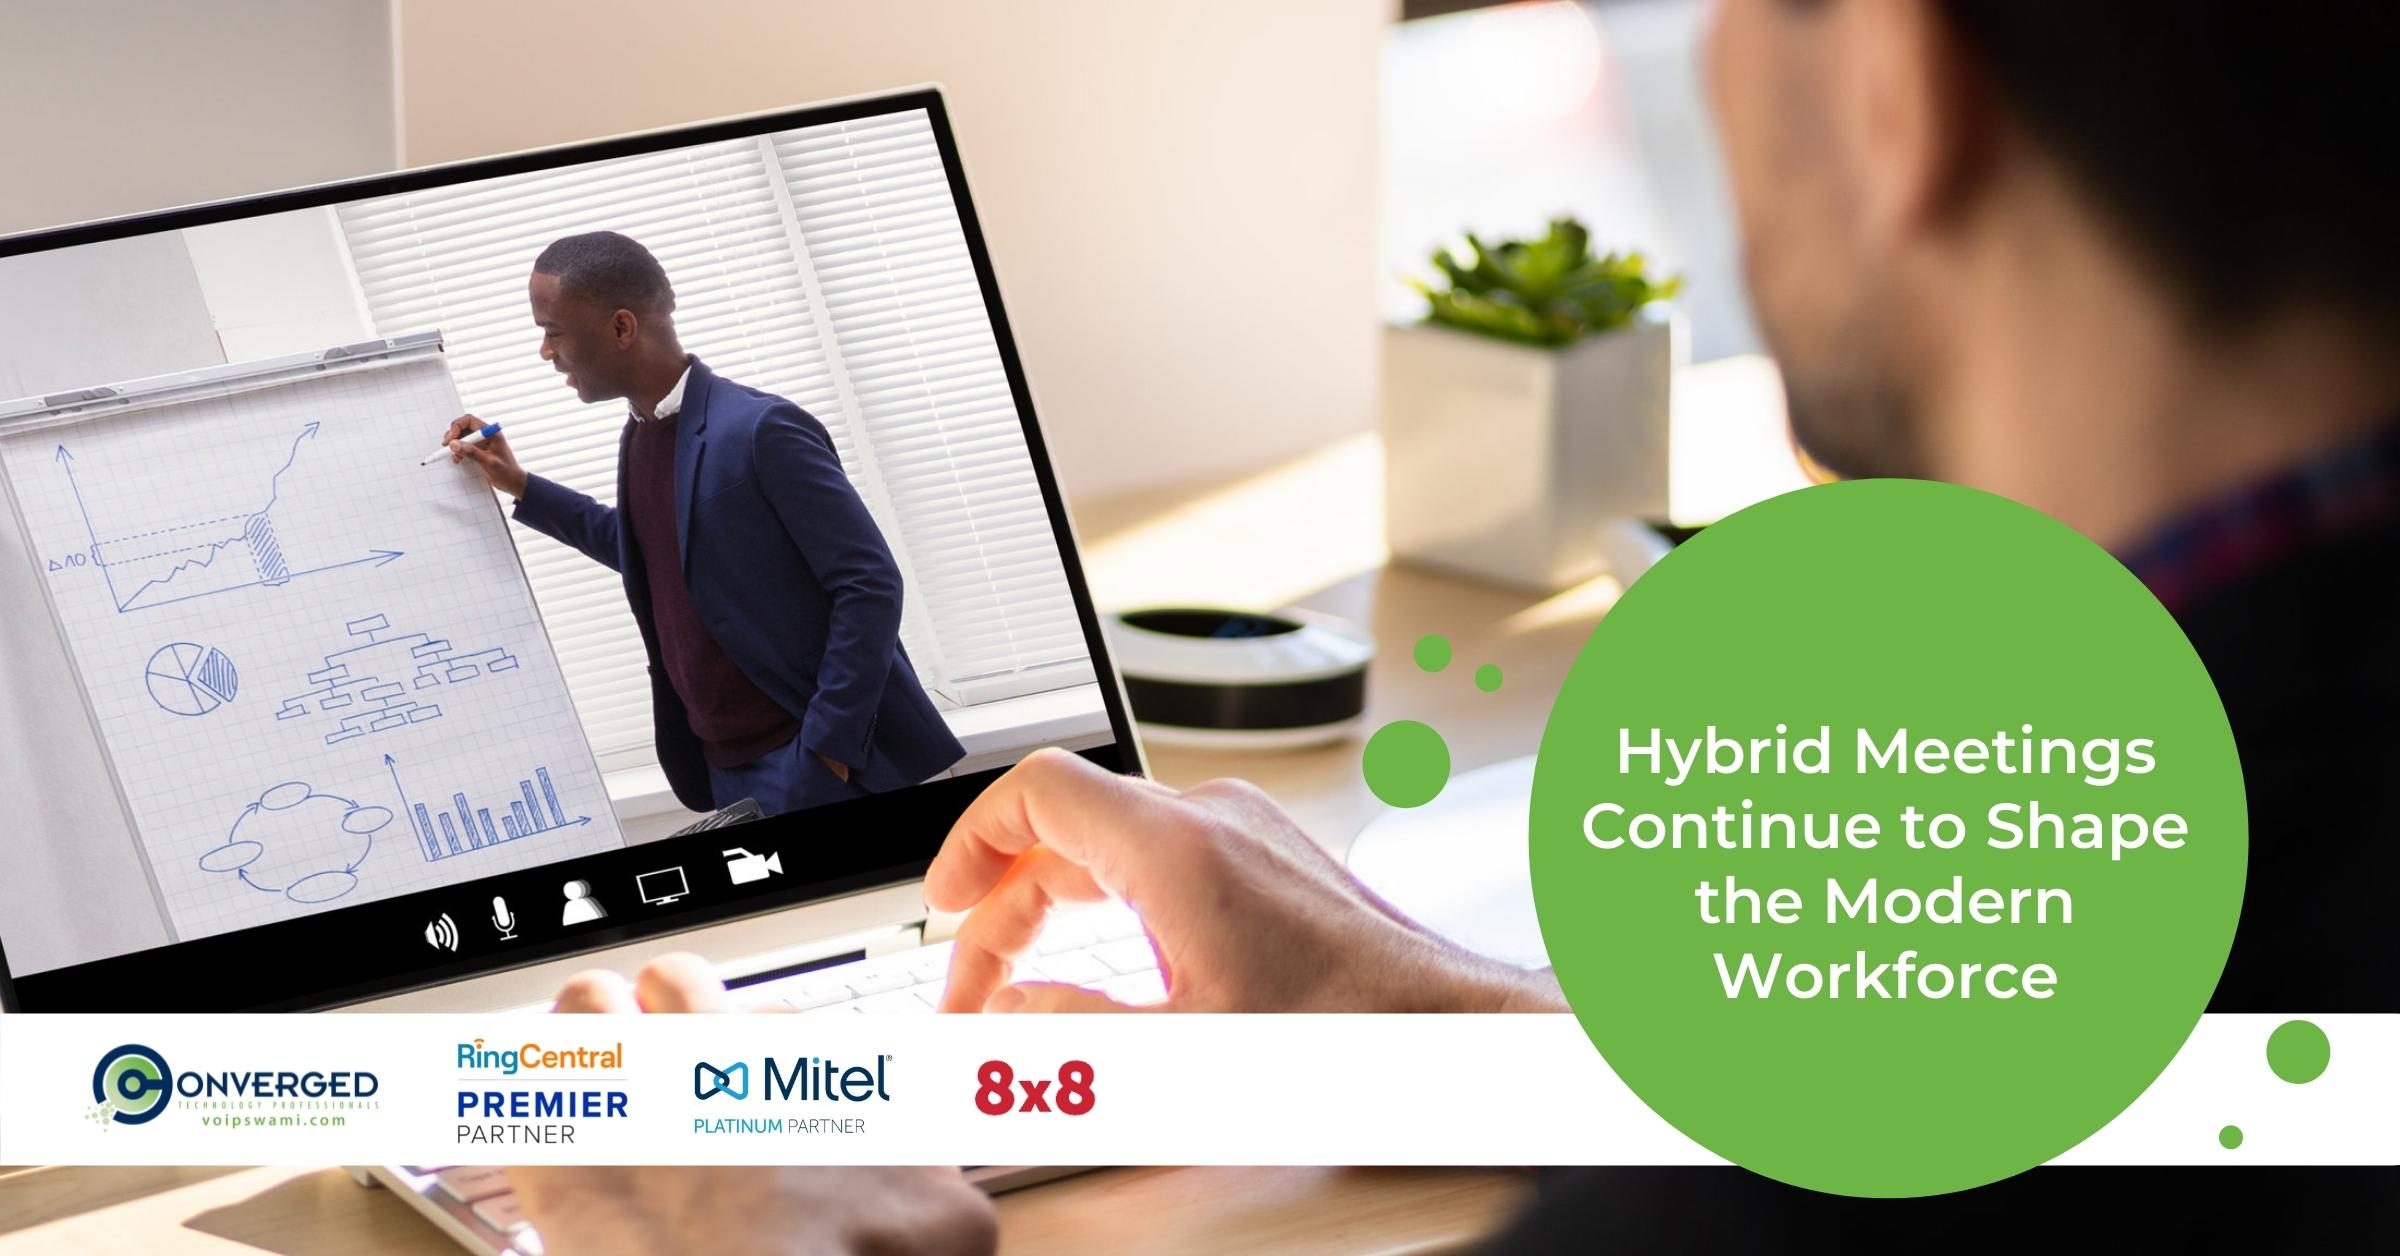 Hybrid Meetings Continue to Shape the Modern Workforce